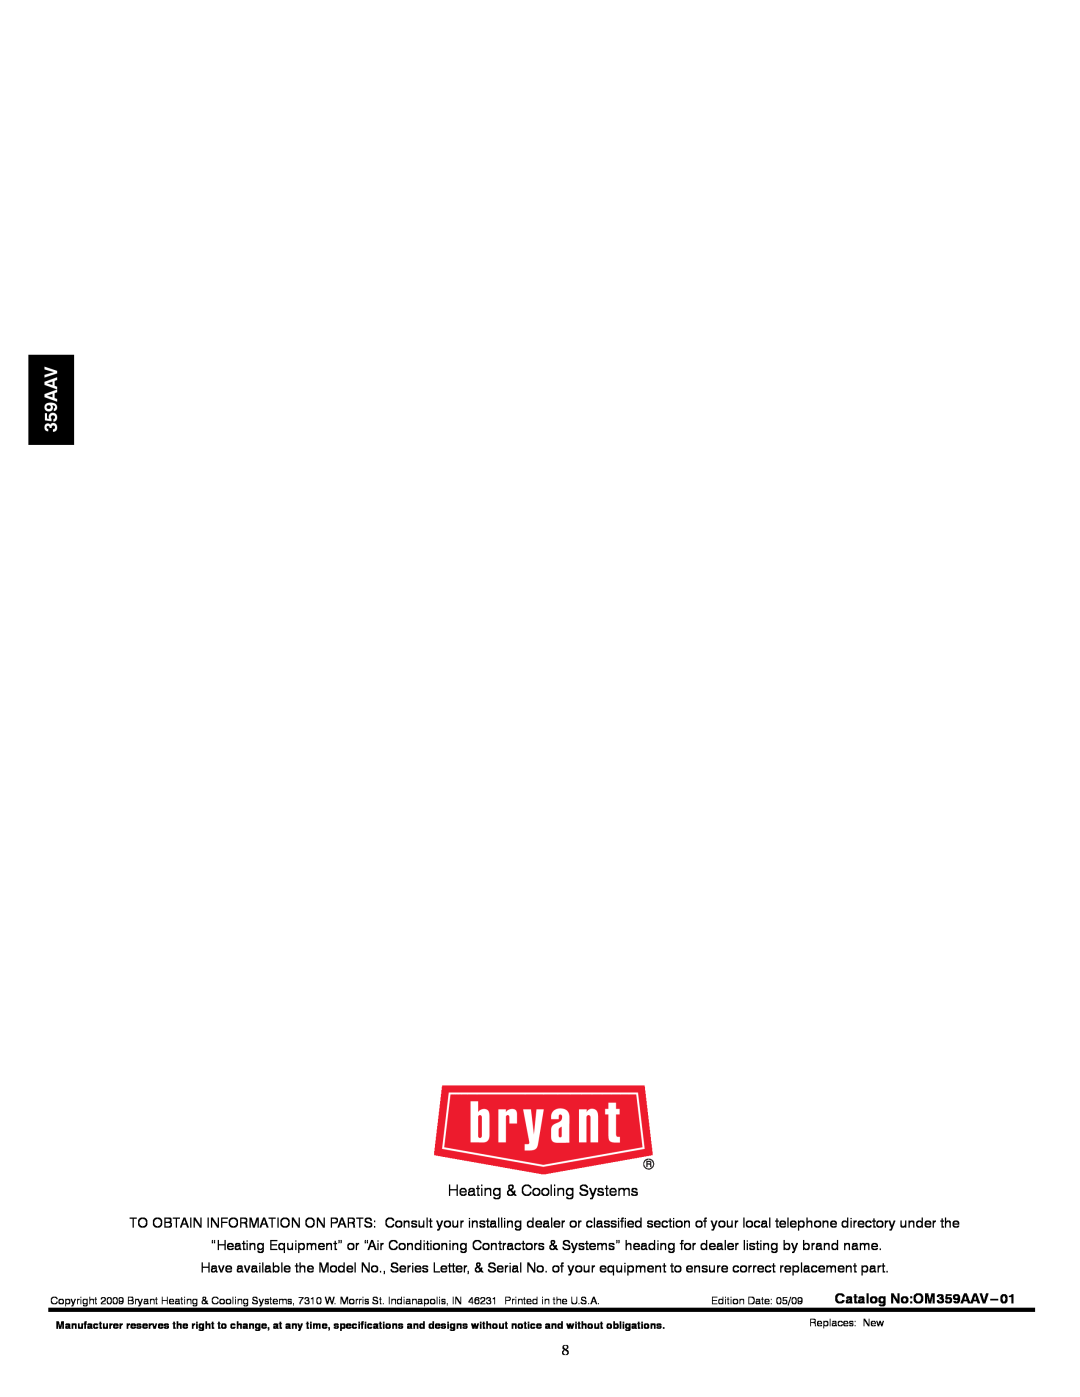 Bryant owner manual Heating & Cooling Systems, Catalog No OM359AAV---01 